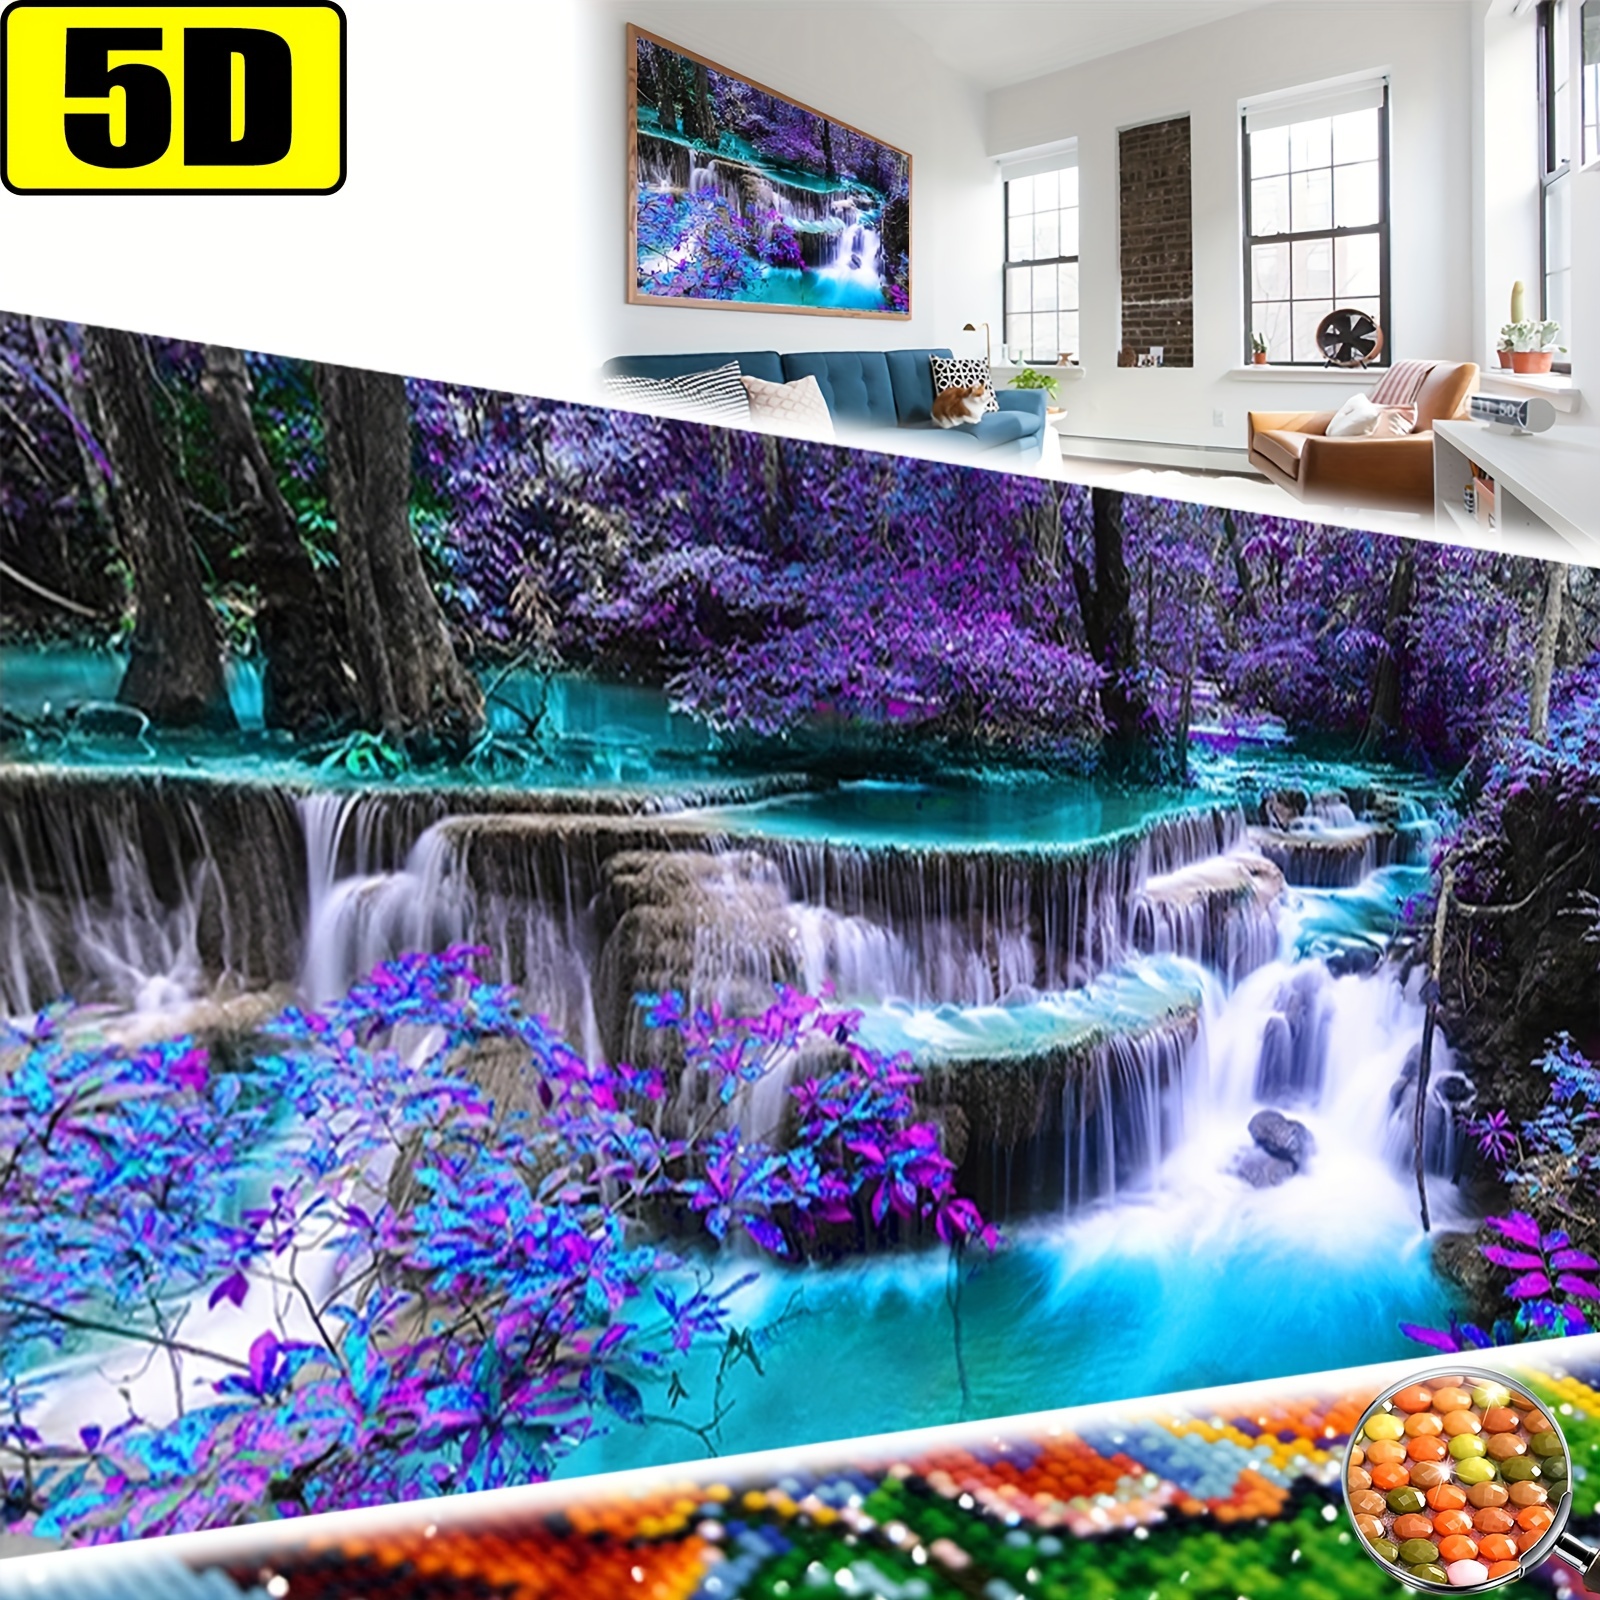 

Diy 5d Diamond Painting Kits For Adults Waterfall Embroidery Full Round Diamond Large Size Diamond Crystal Gem Arts Painting Craft For Home Wall Decor